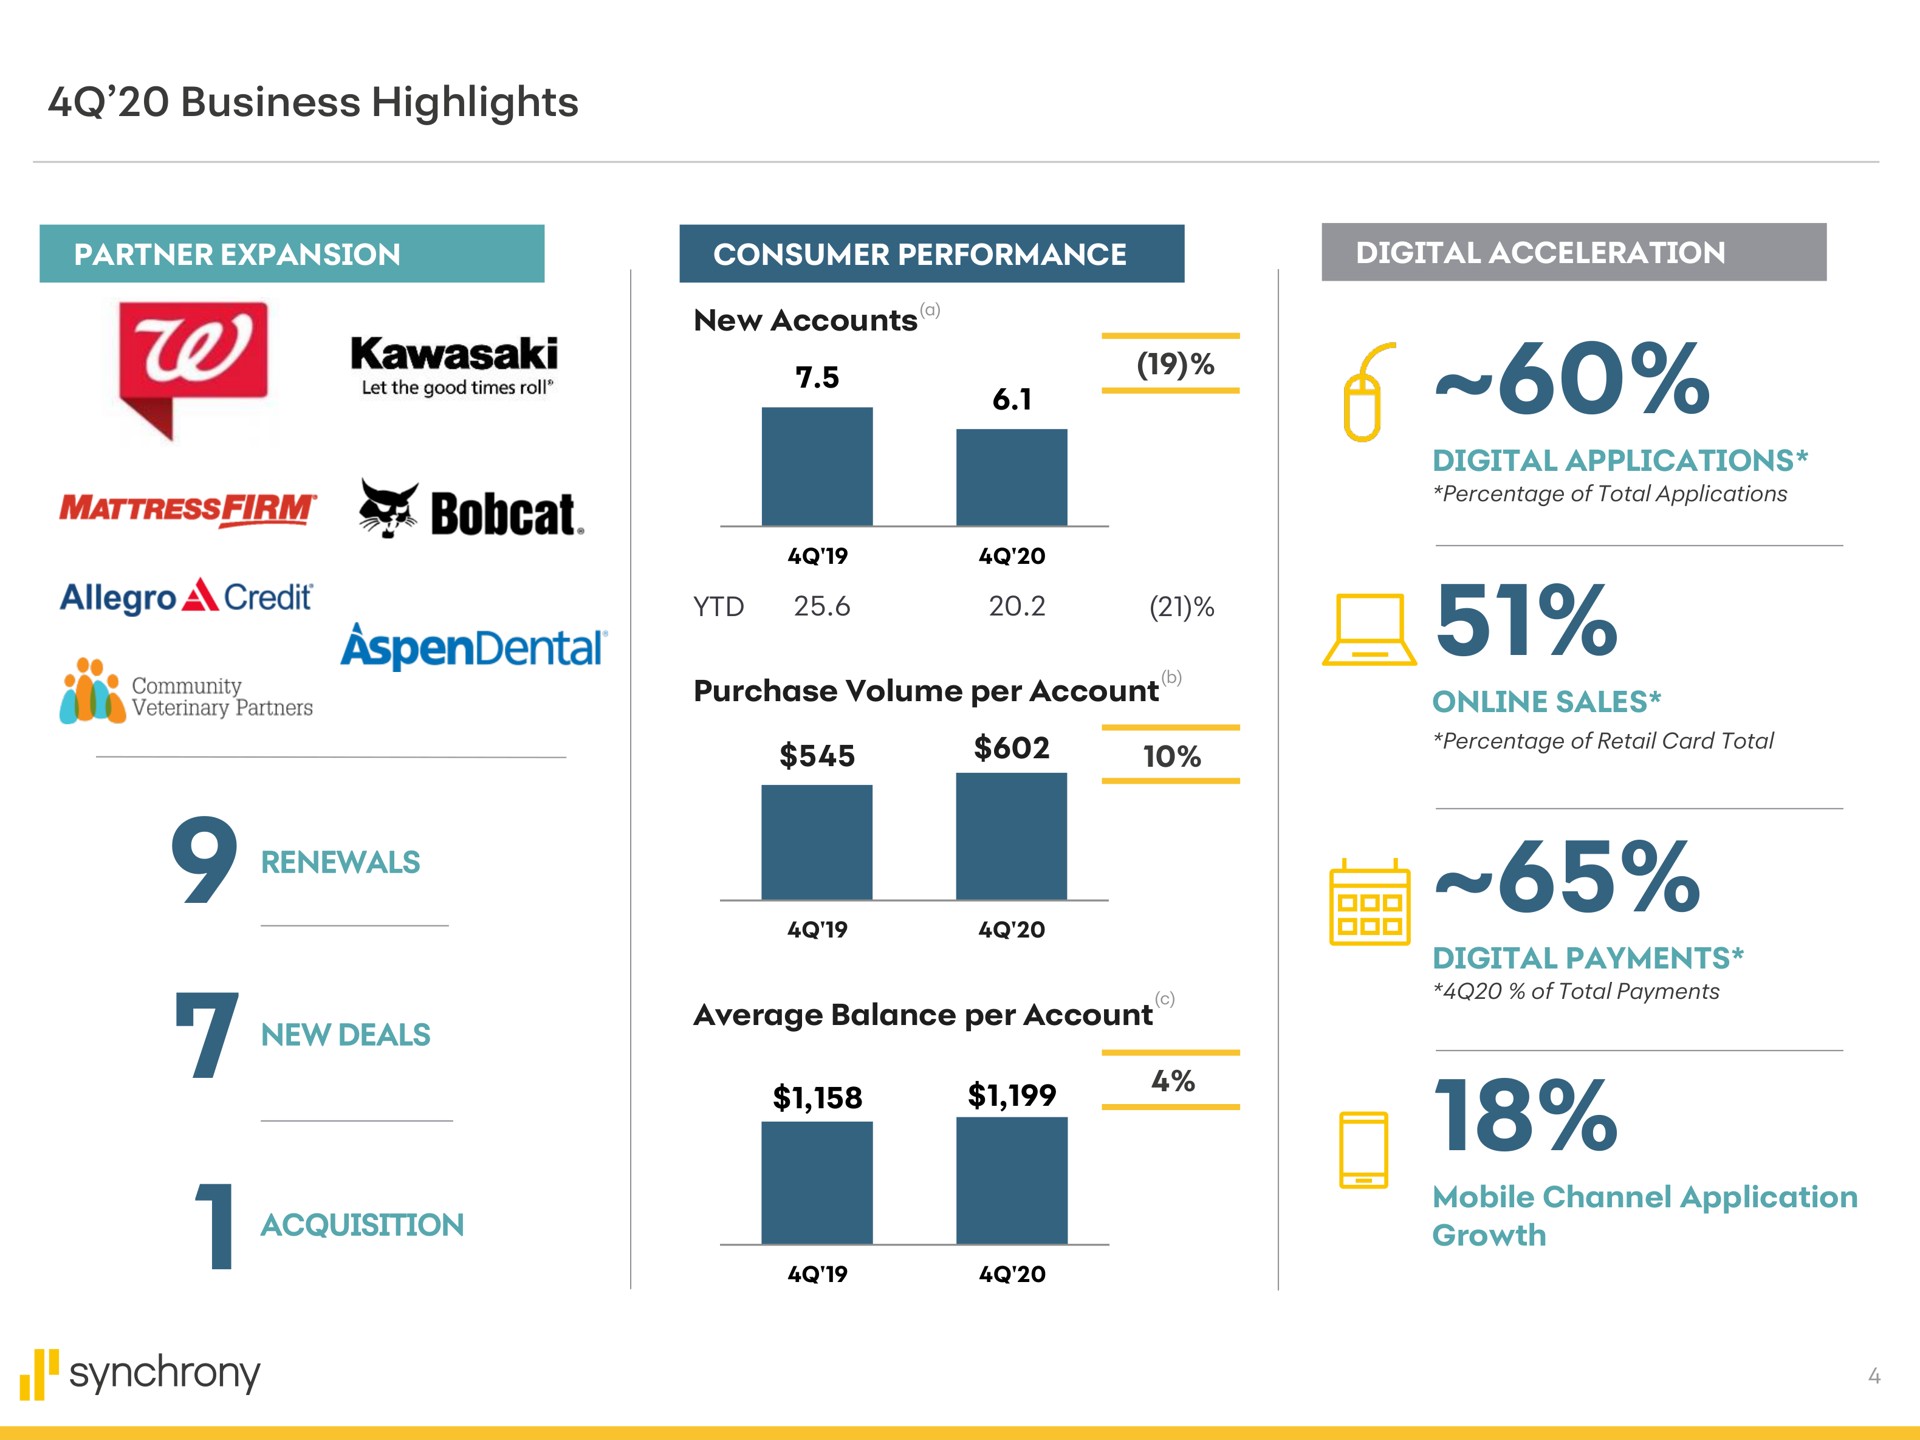 business highlights new accounts a bobcat allegro a credit renewals new deals acquisition synchrony | Synchrony Financial